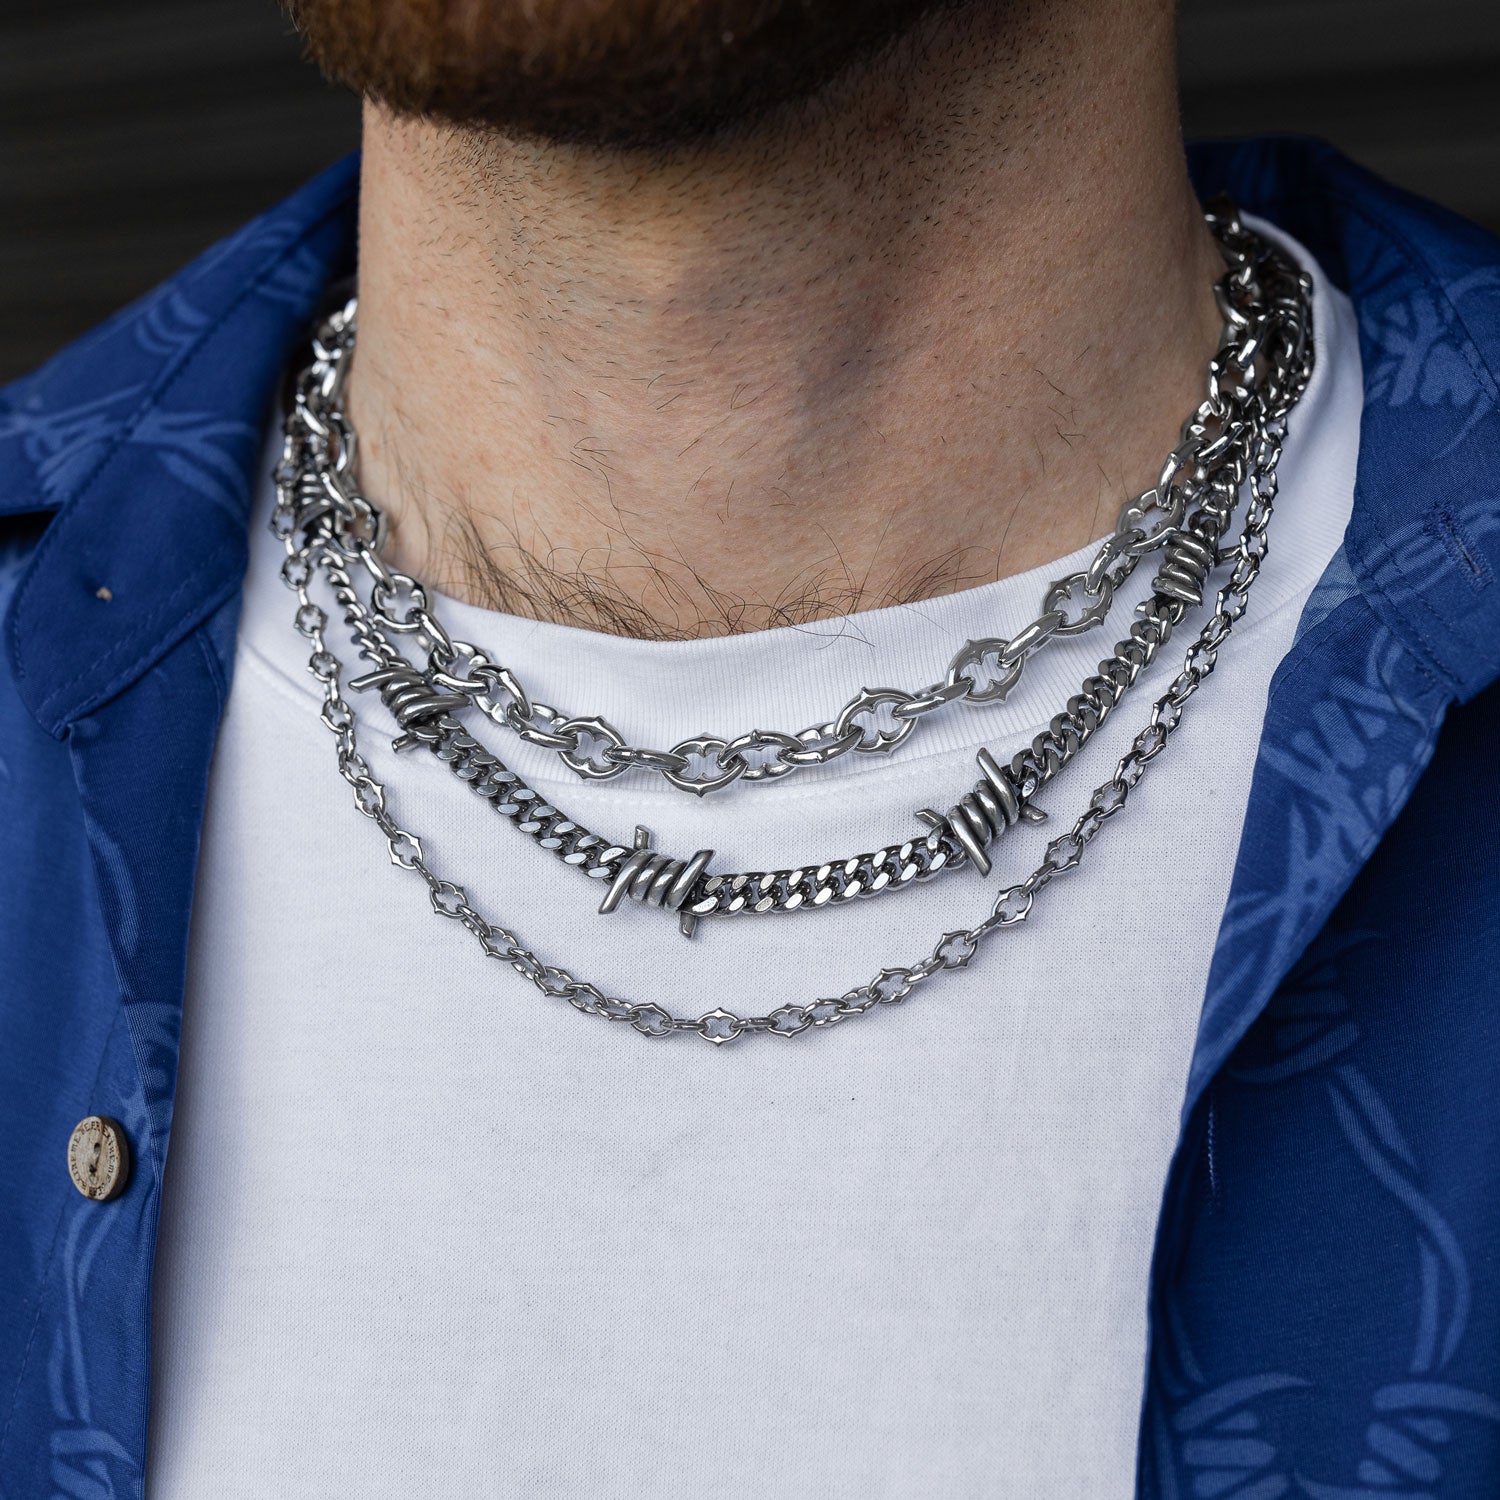 Gothic silver chain set with spiked and barbed wire jewelry on mans neck by statement collective 